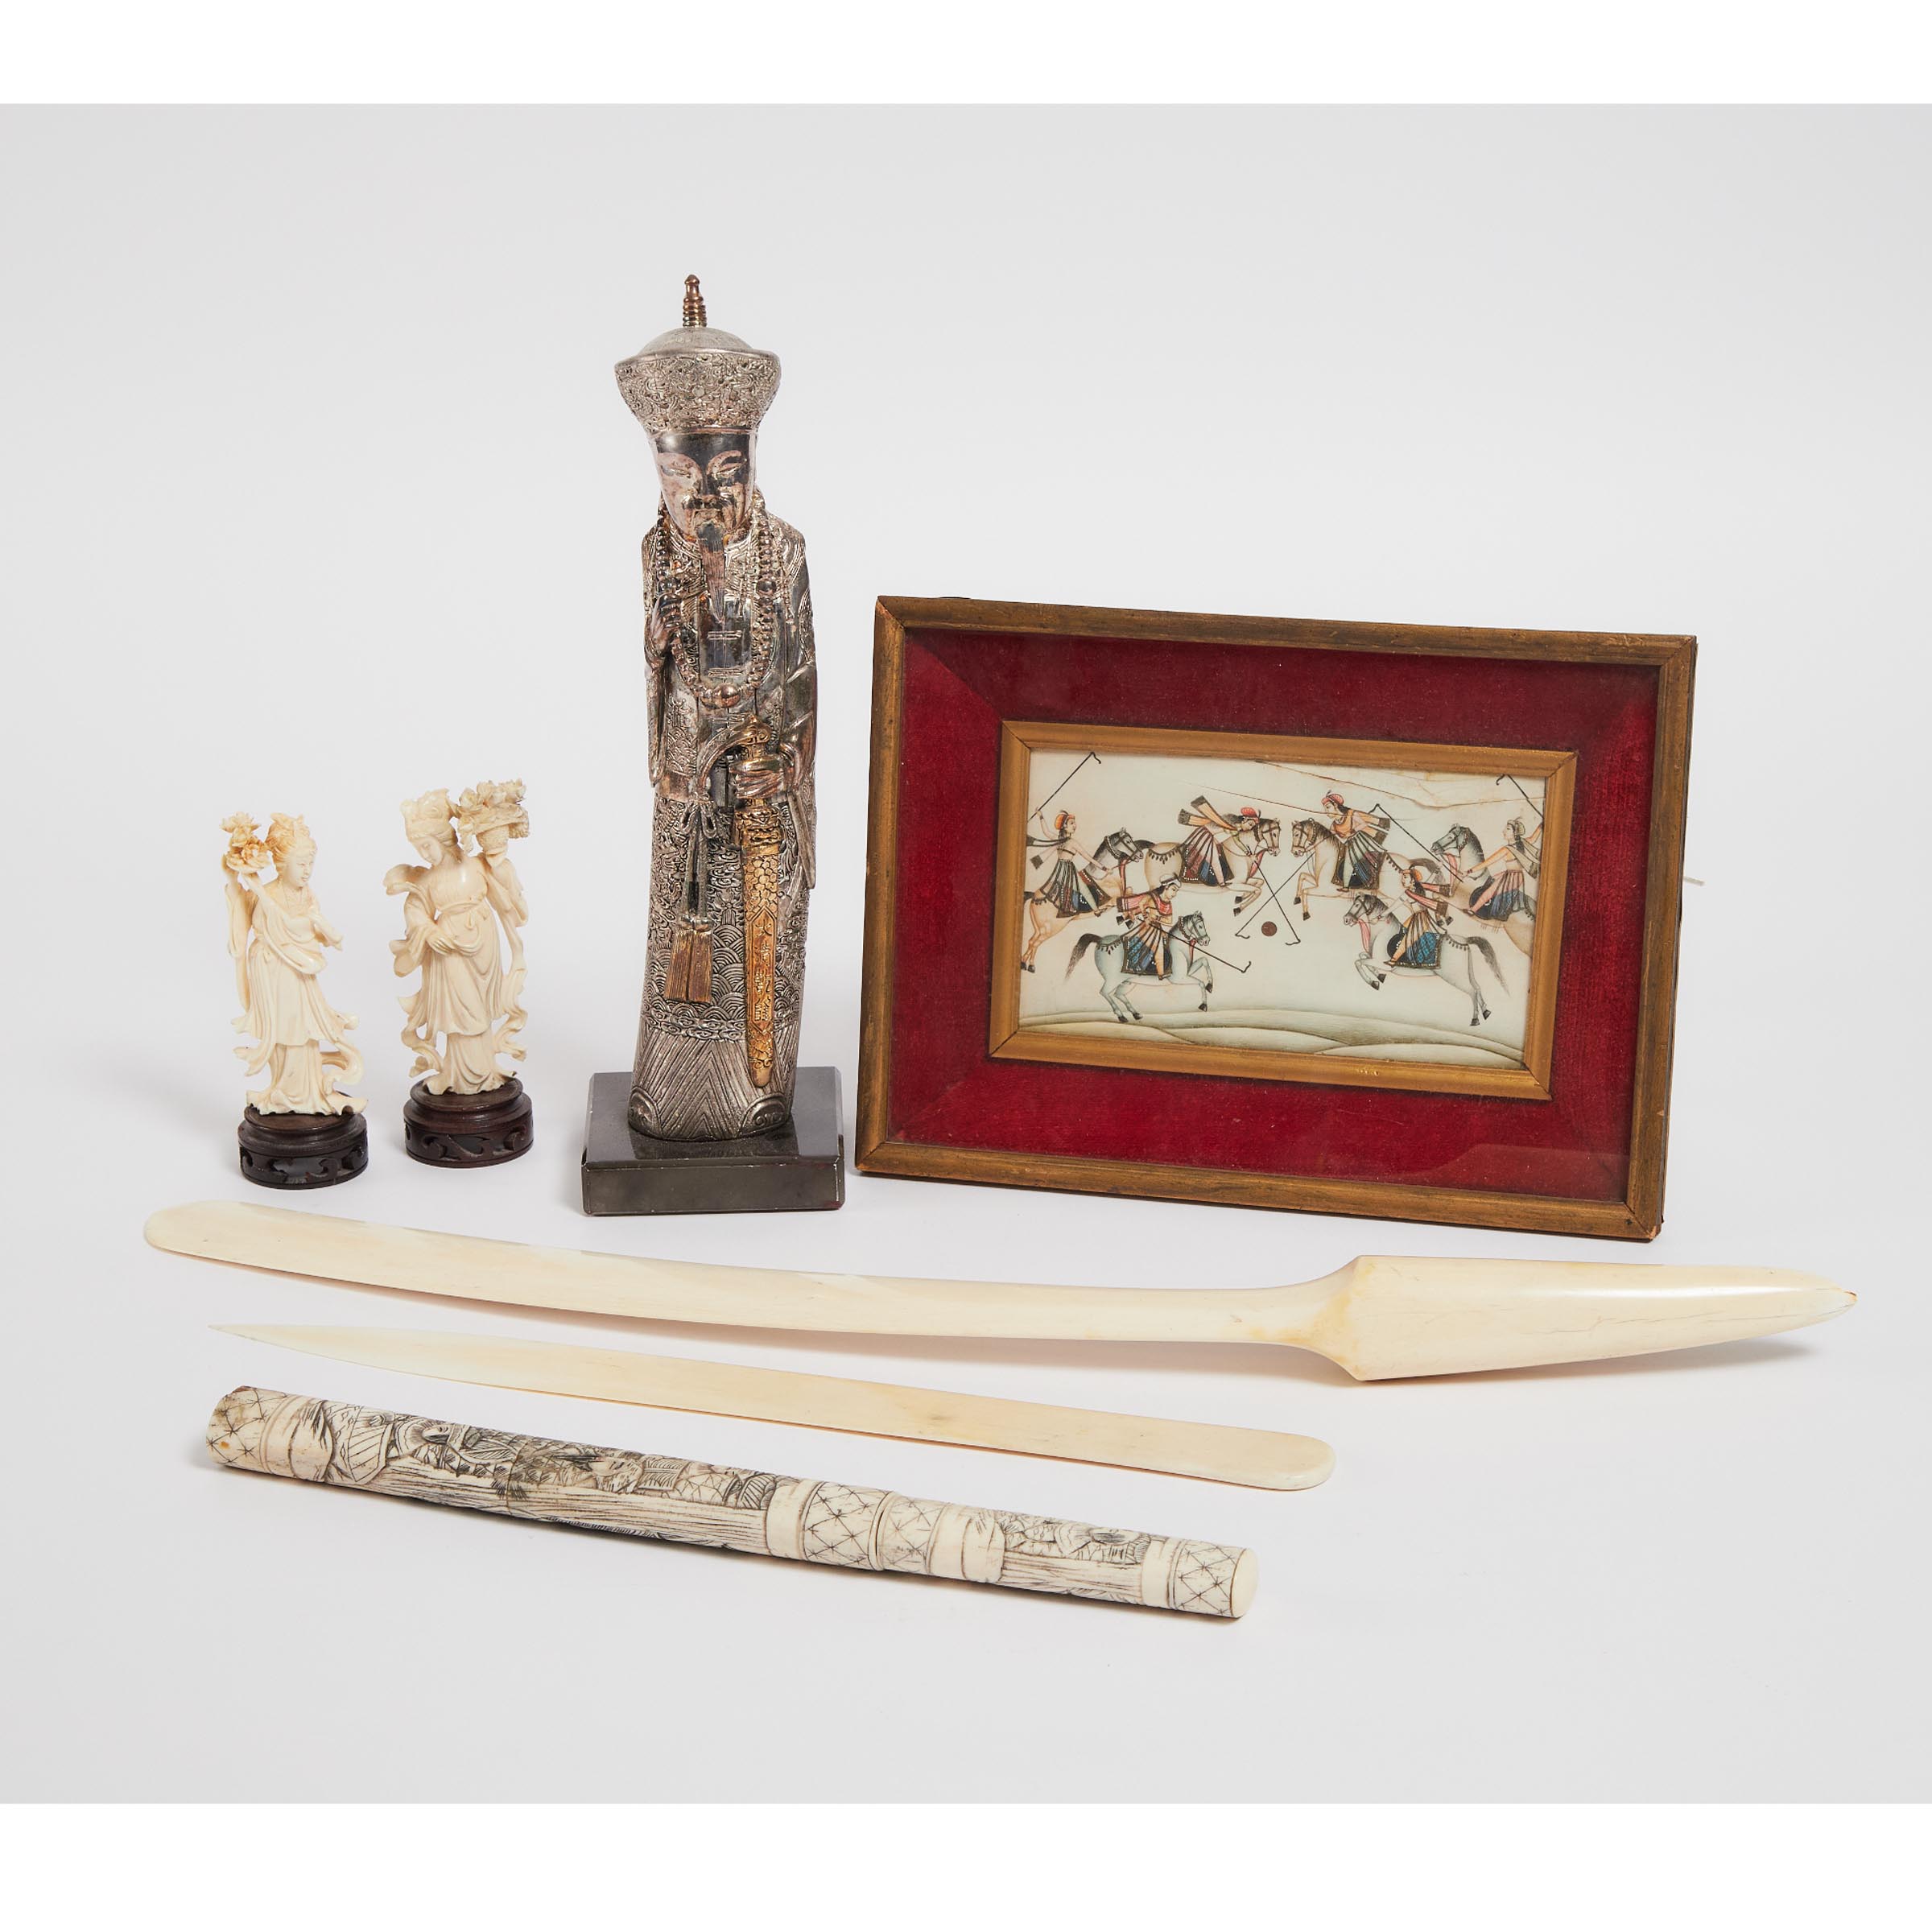 A Group of Six Ivory and Bone Carvings